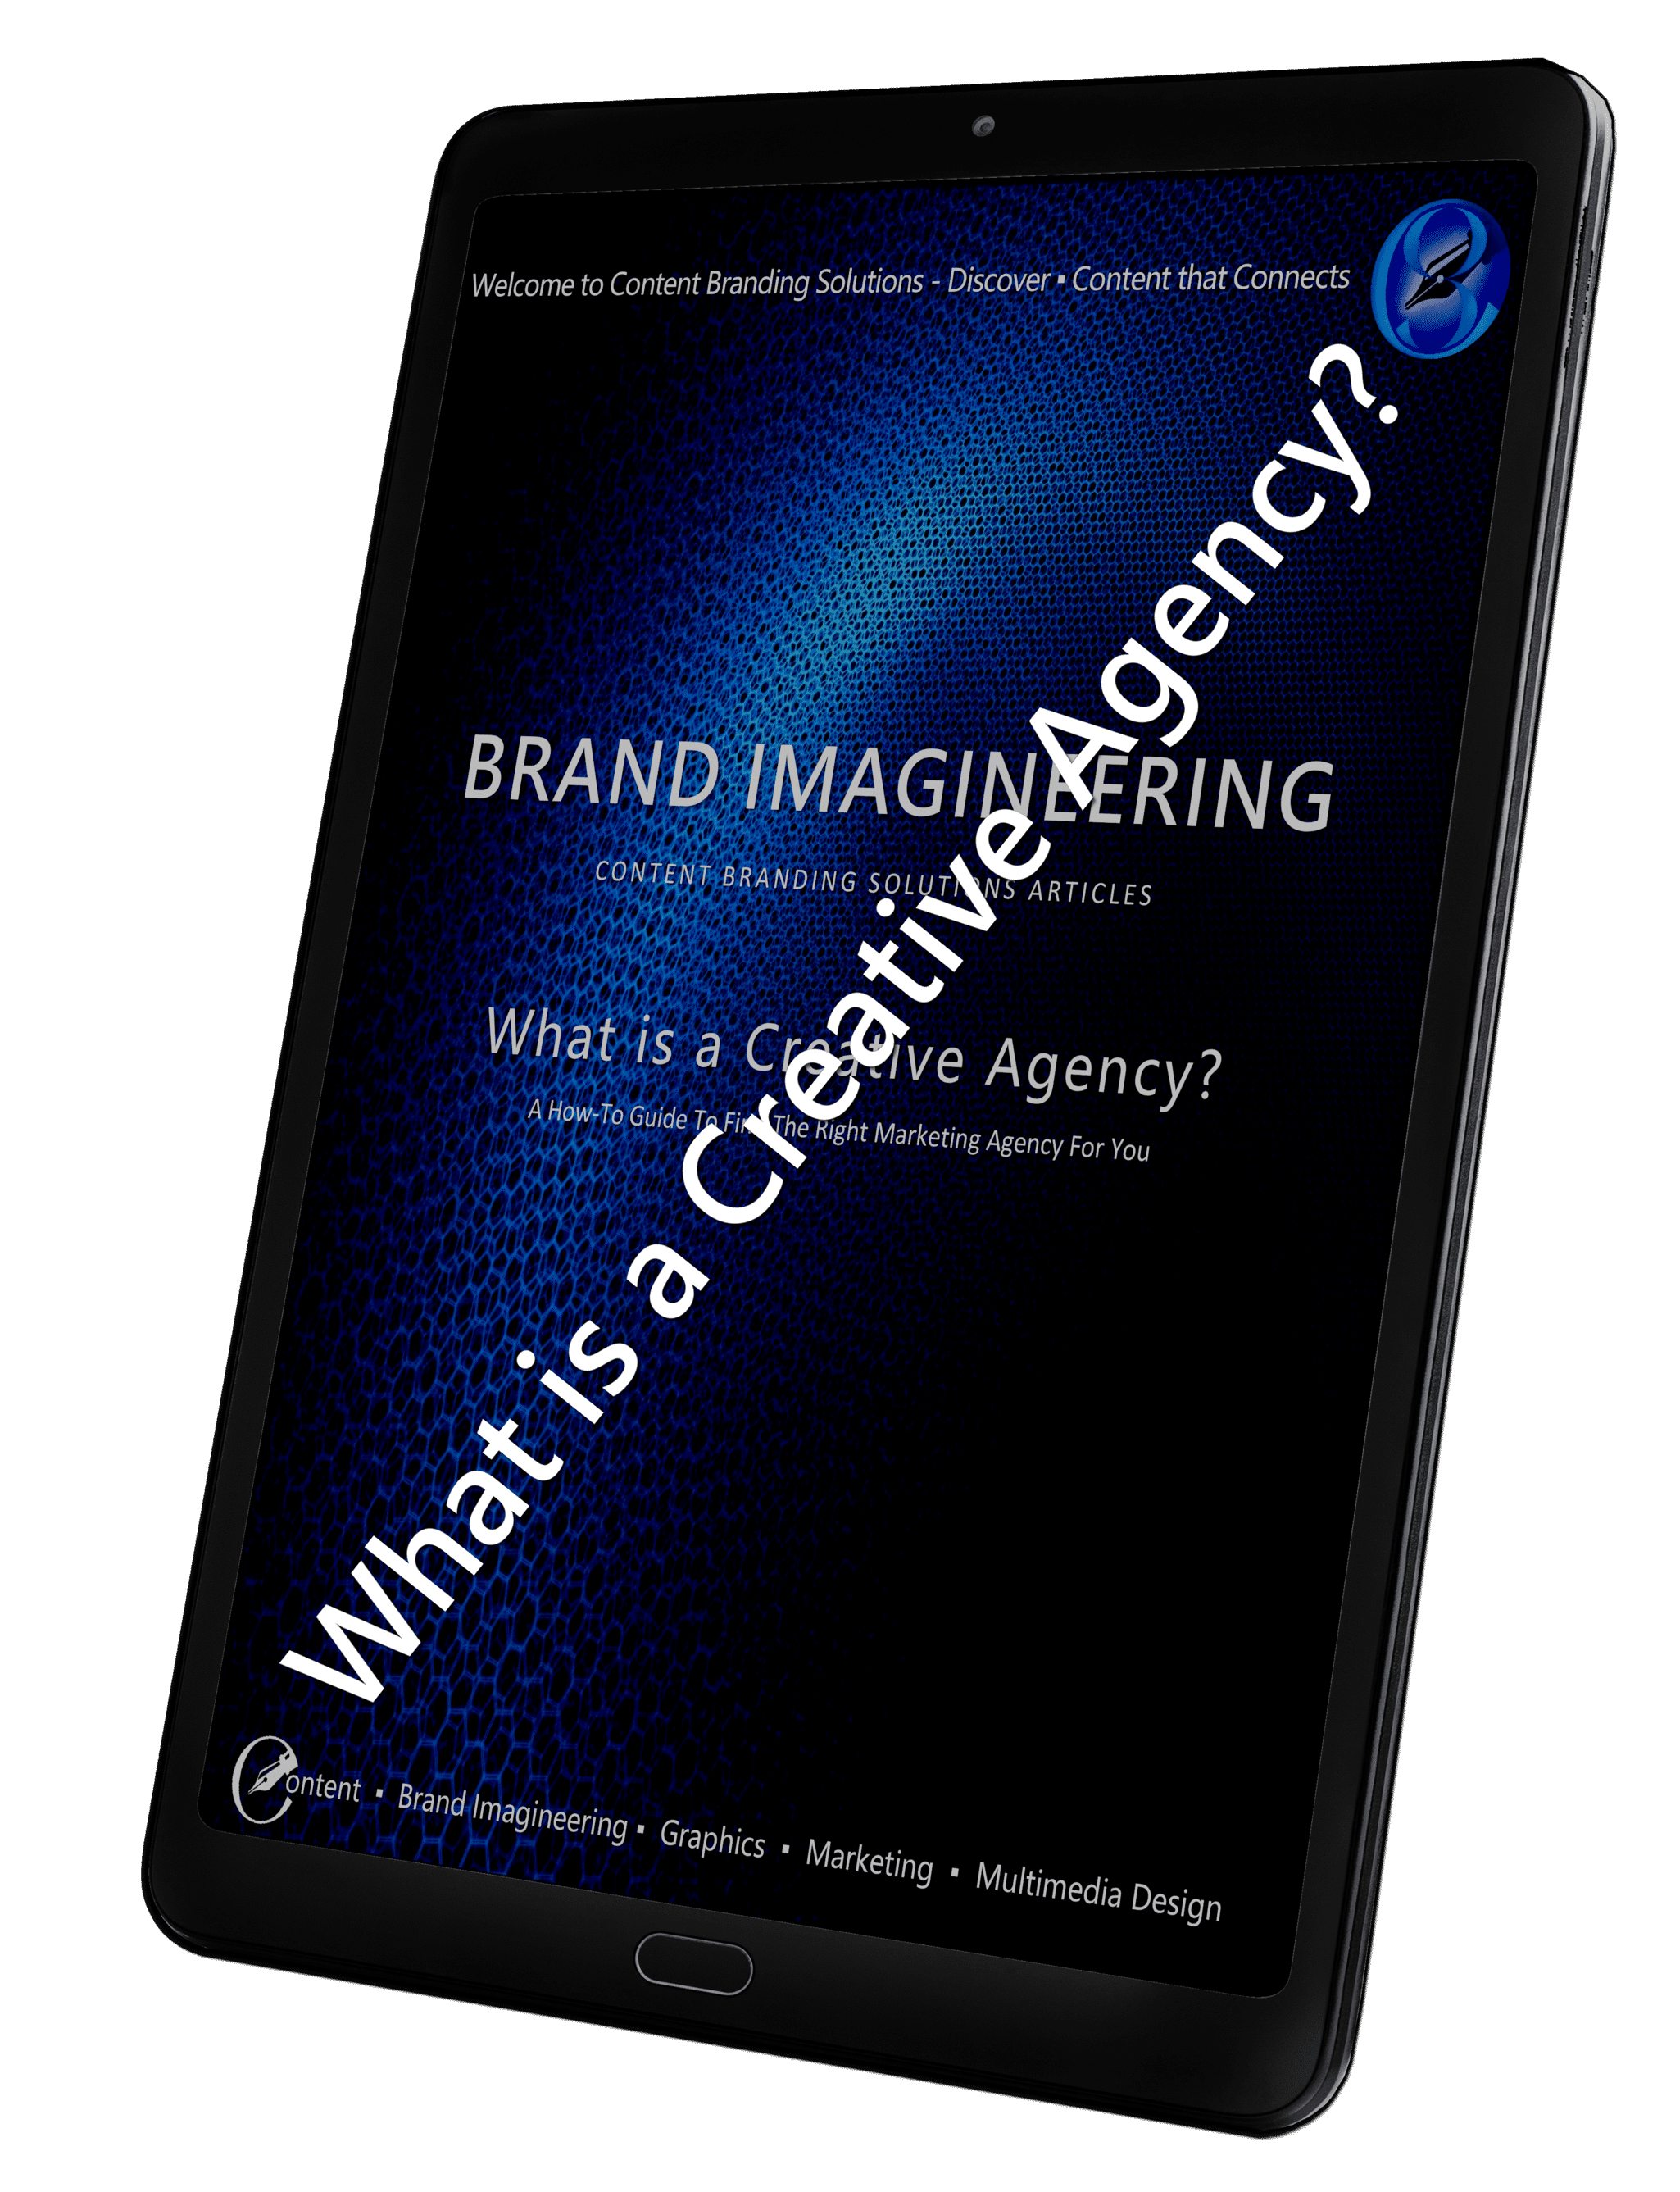 Download and Discover this FREE eBook to Discover What Brand Imagineering can do for You!